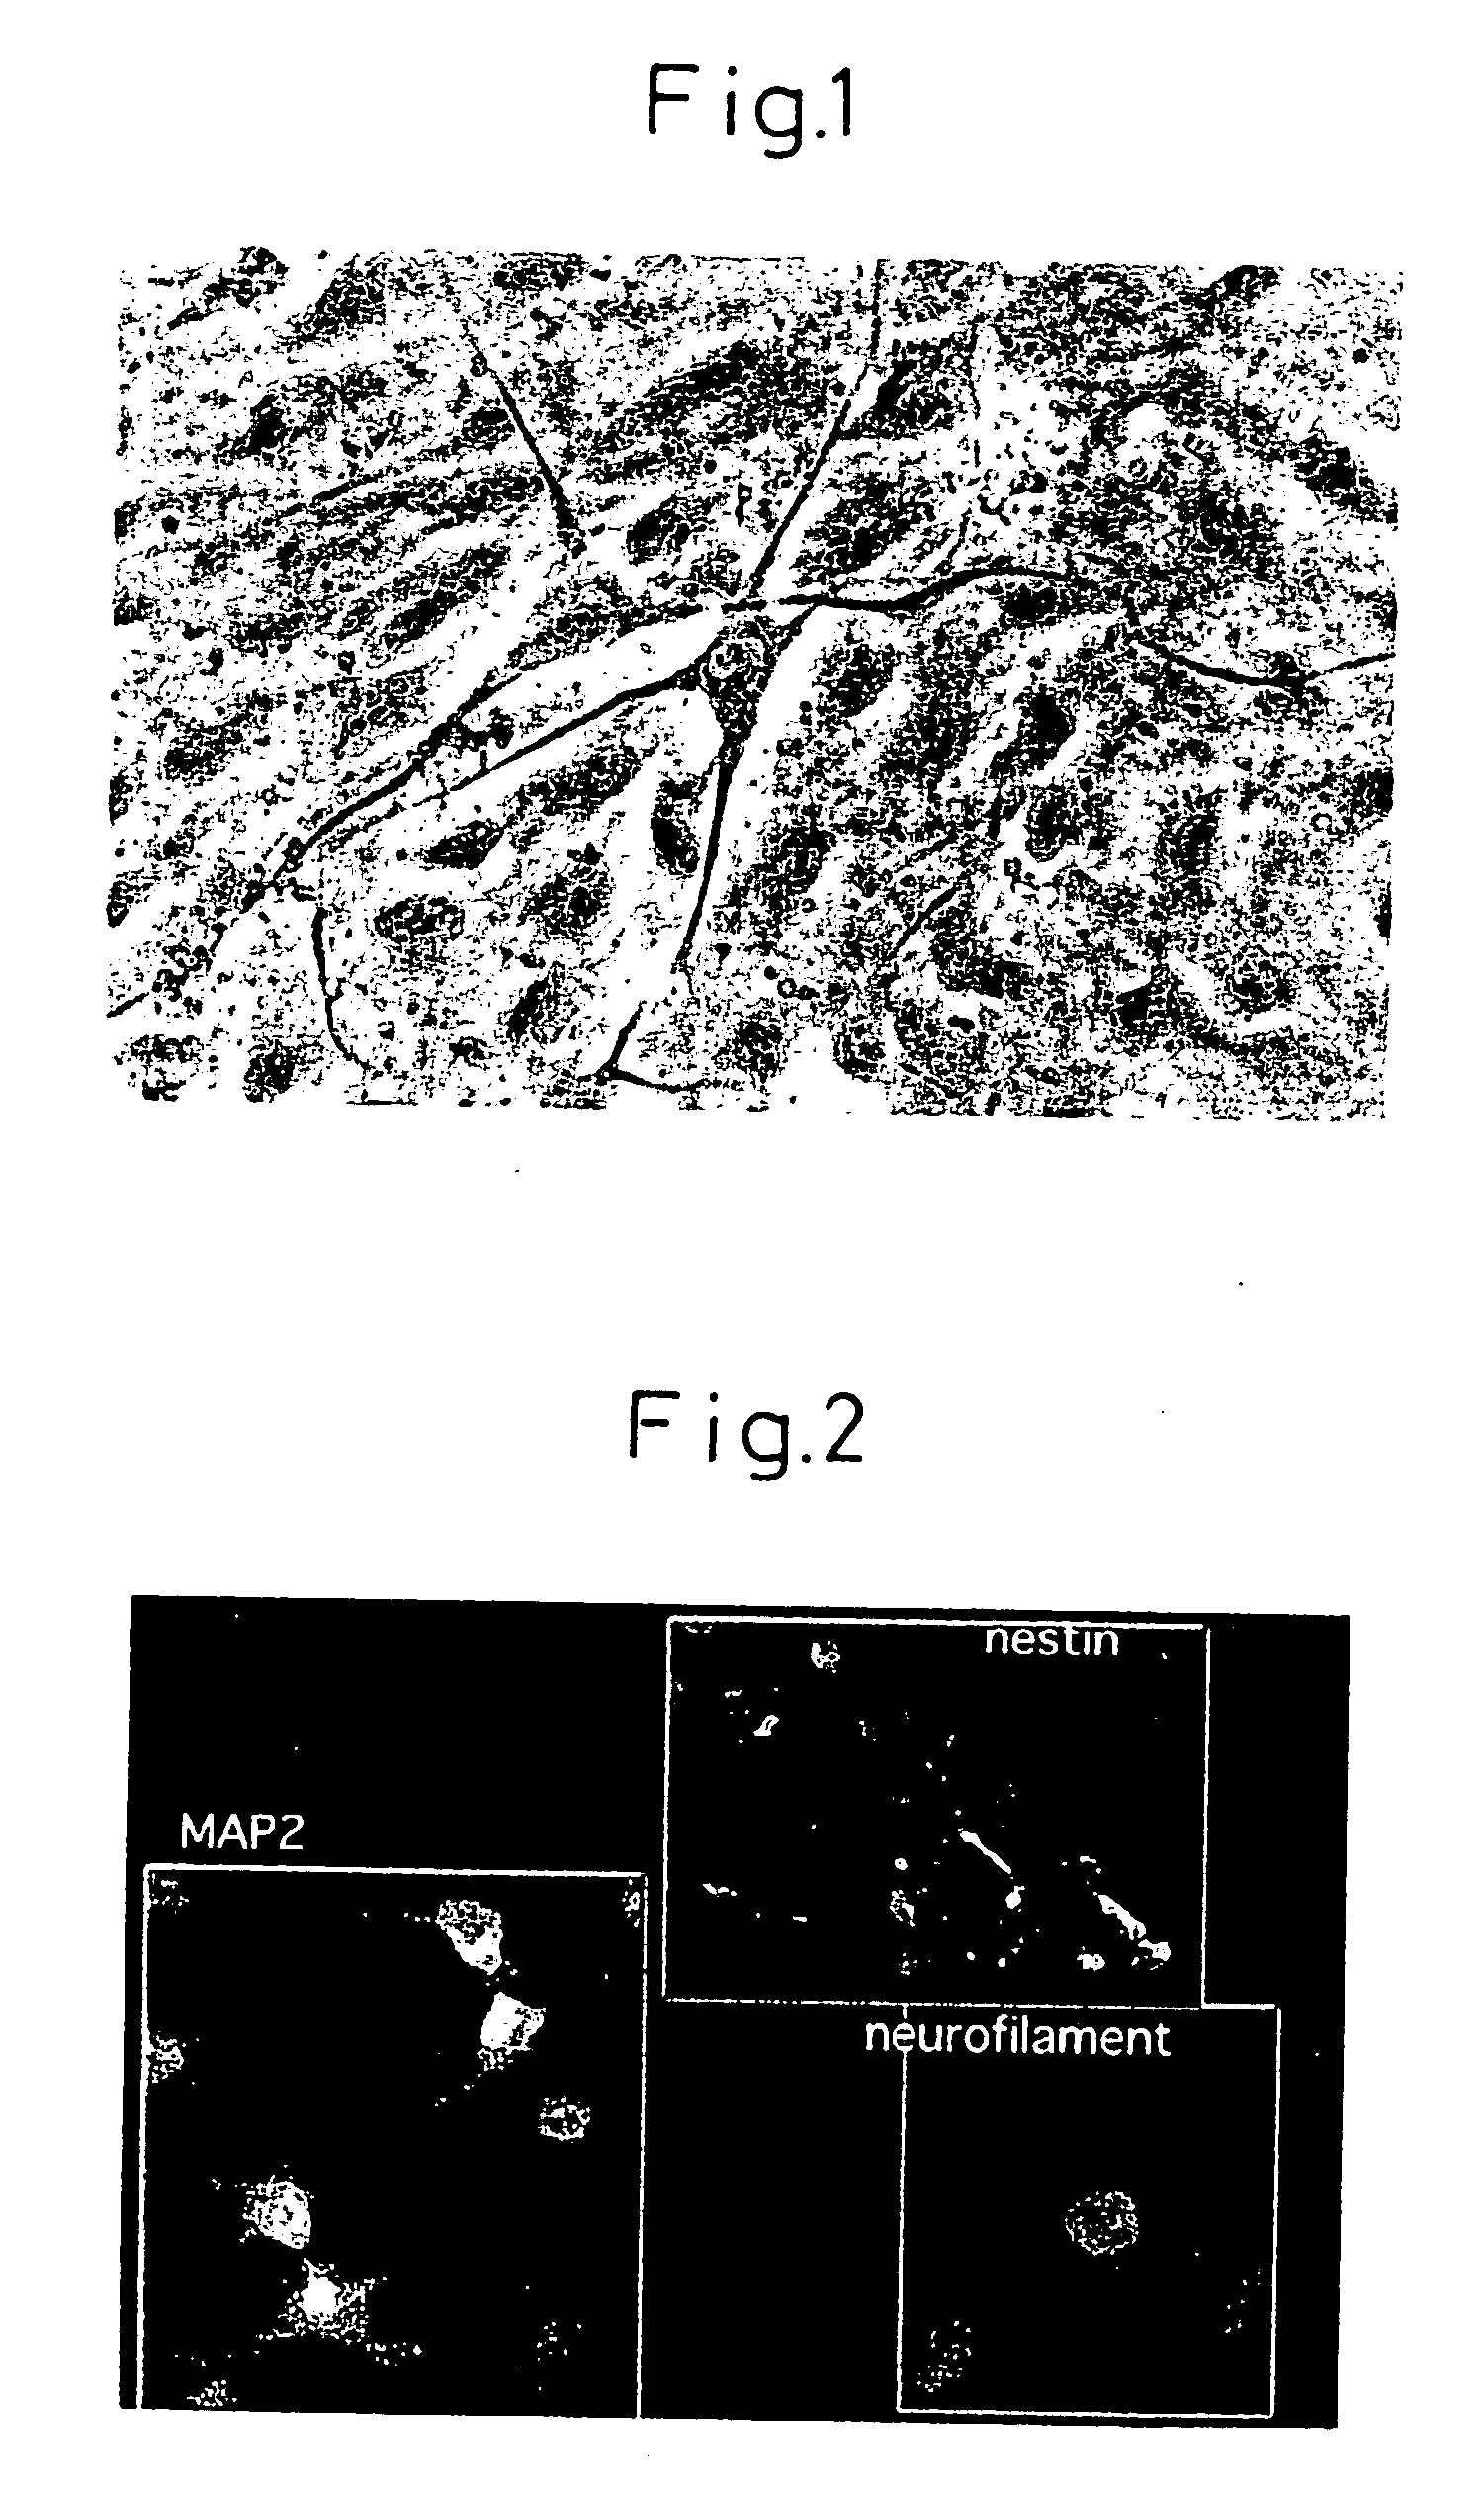 Method of inducing differentiation of bone marrow stromal cells to neural cells or skeletal muscle cells by introduction of notch gene